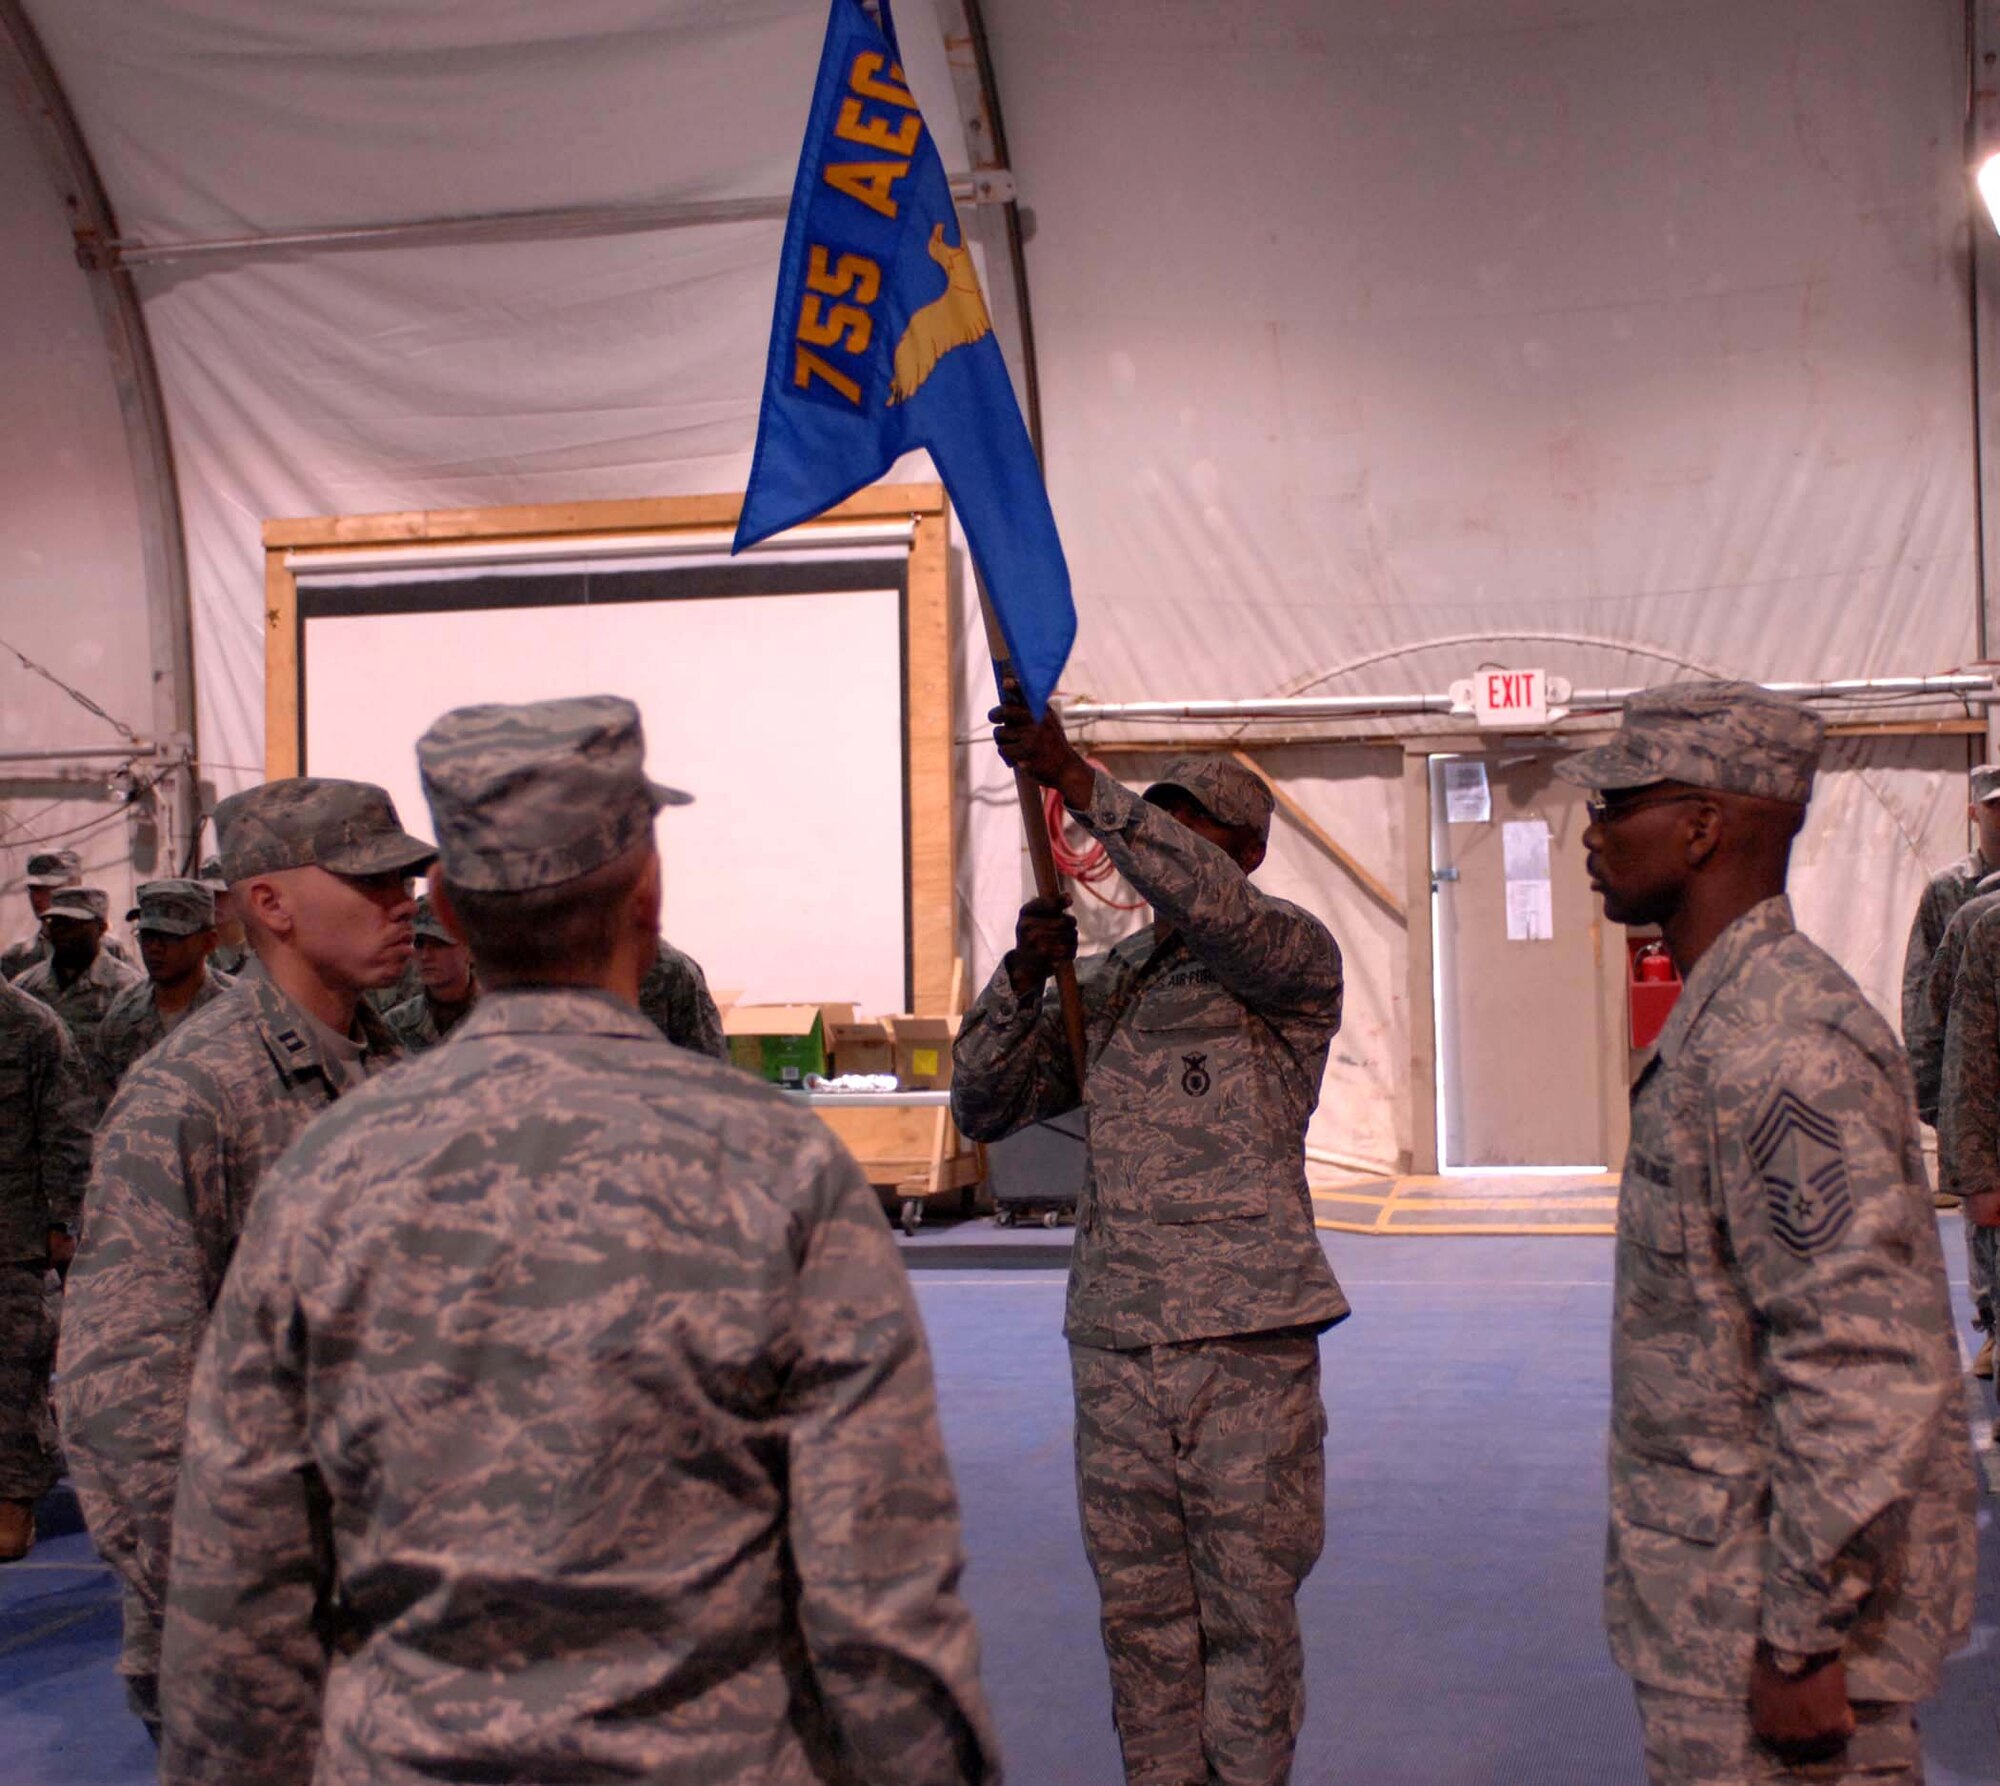 The 755th Expeditionary Security Forces Squadron guidon is presented for the last time Jan. 11 at Bagram Air Base, Afghanistan. The squadron, originally formed in May 2006 in response to a Army request for support of its detainee operations mission, was inactivated during a formal ceremony Jan. 11 here. (U.S. Air Force photo/Staff Sgt. Mike Andriacco)
